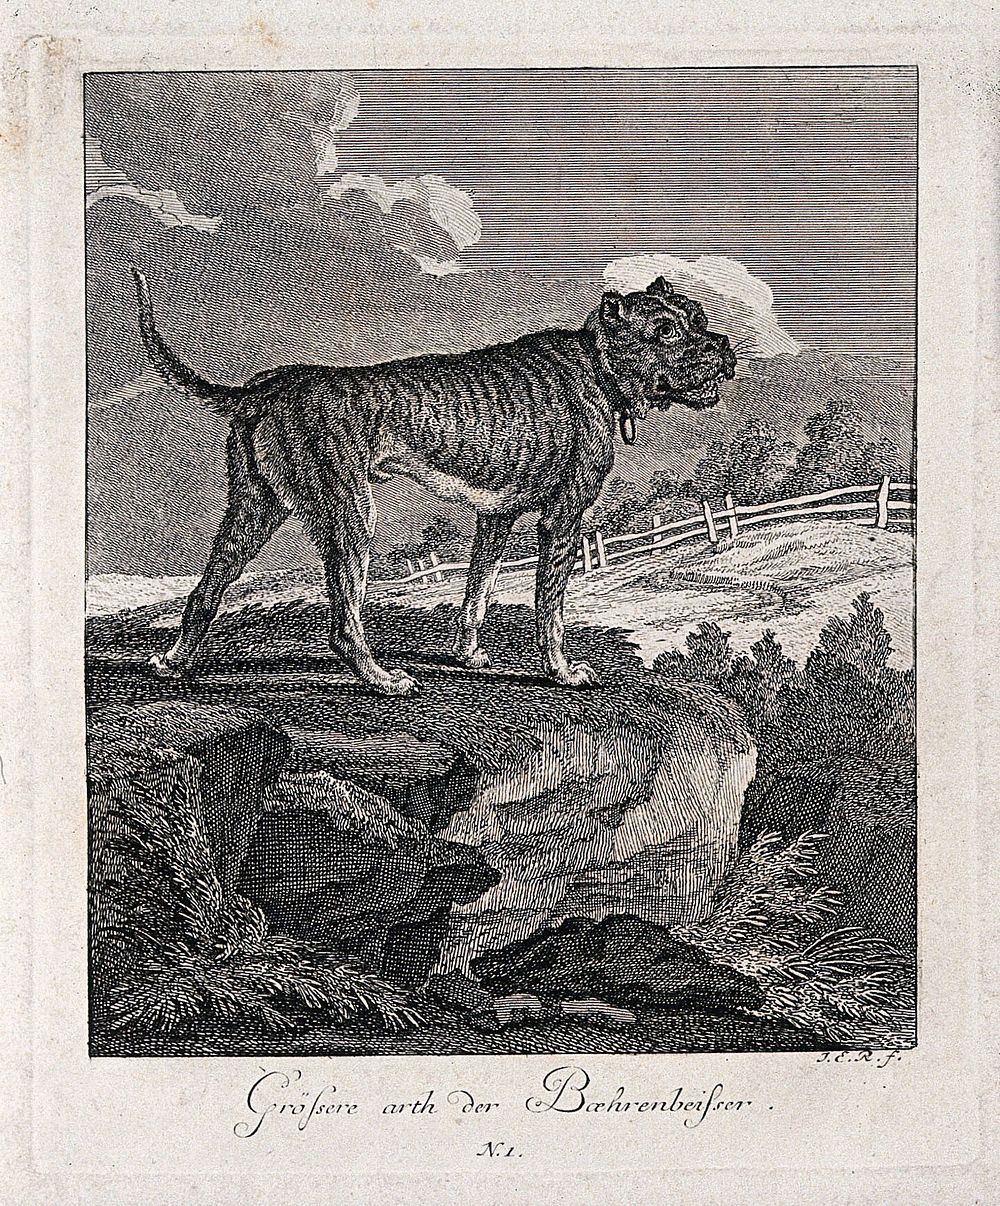 Large bulldog standing on a rock overlooking an enclosure. Etching by J. E. Ridinger.